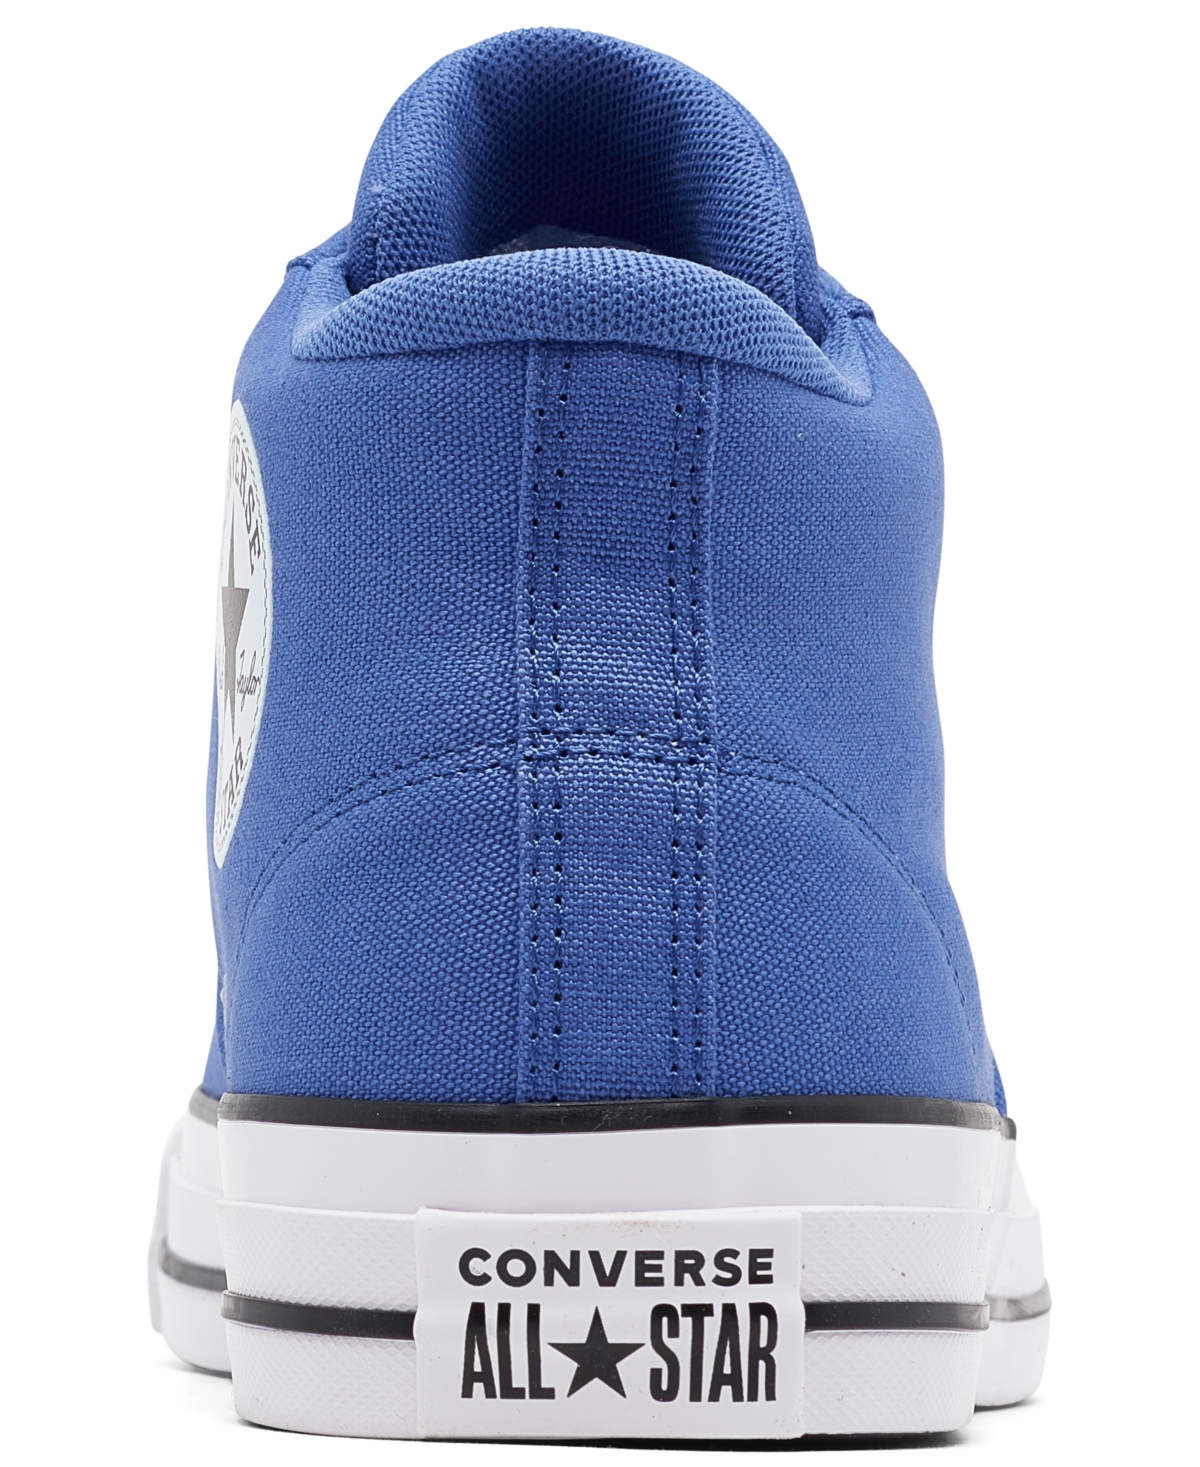 Shop Converse Men's Chuck Taylor All Star Malden Street Vintage-like Athletic Casual Sneakers From Finish Line In Ancestral Blue,white